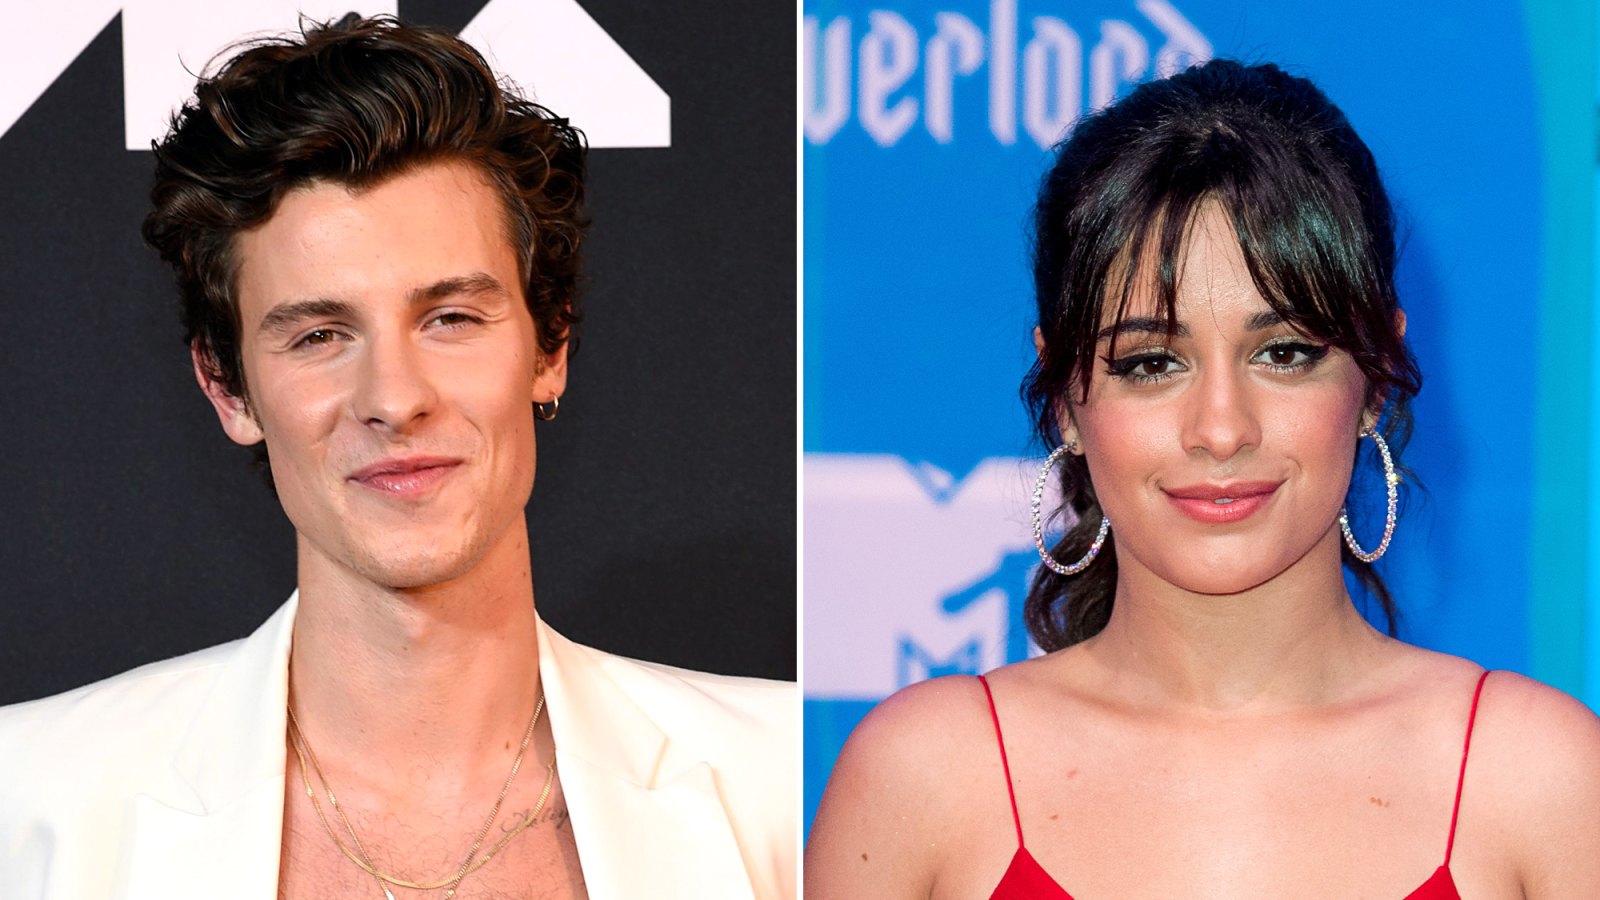 Shawn Mendes Adorably Cuddles With His Dog After Camila Cabello's Split Comments